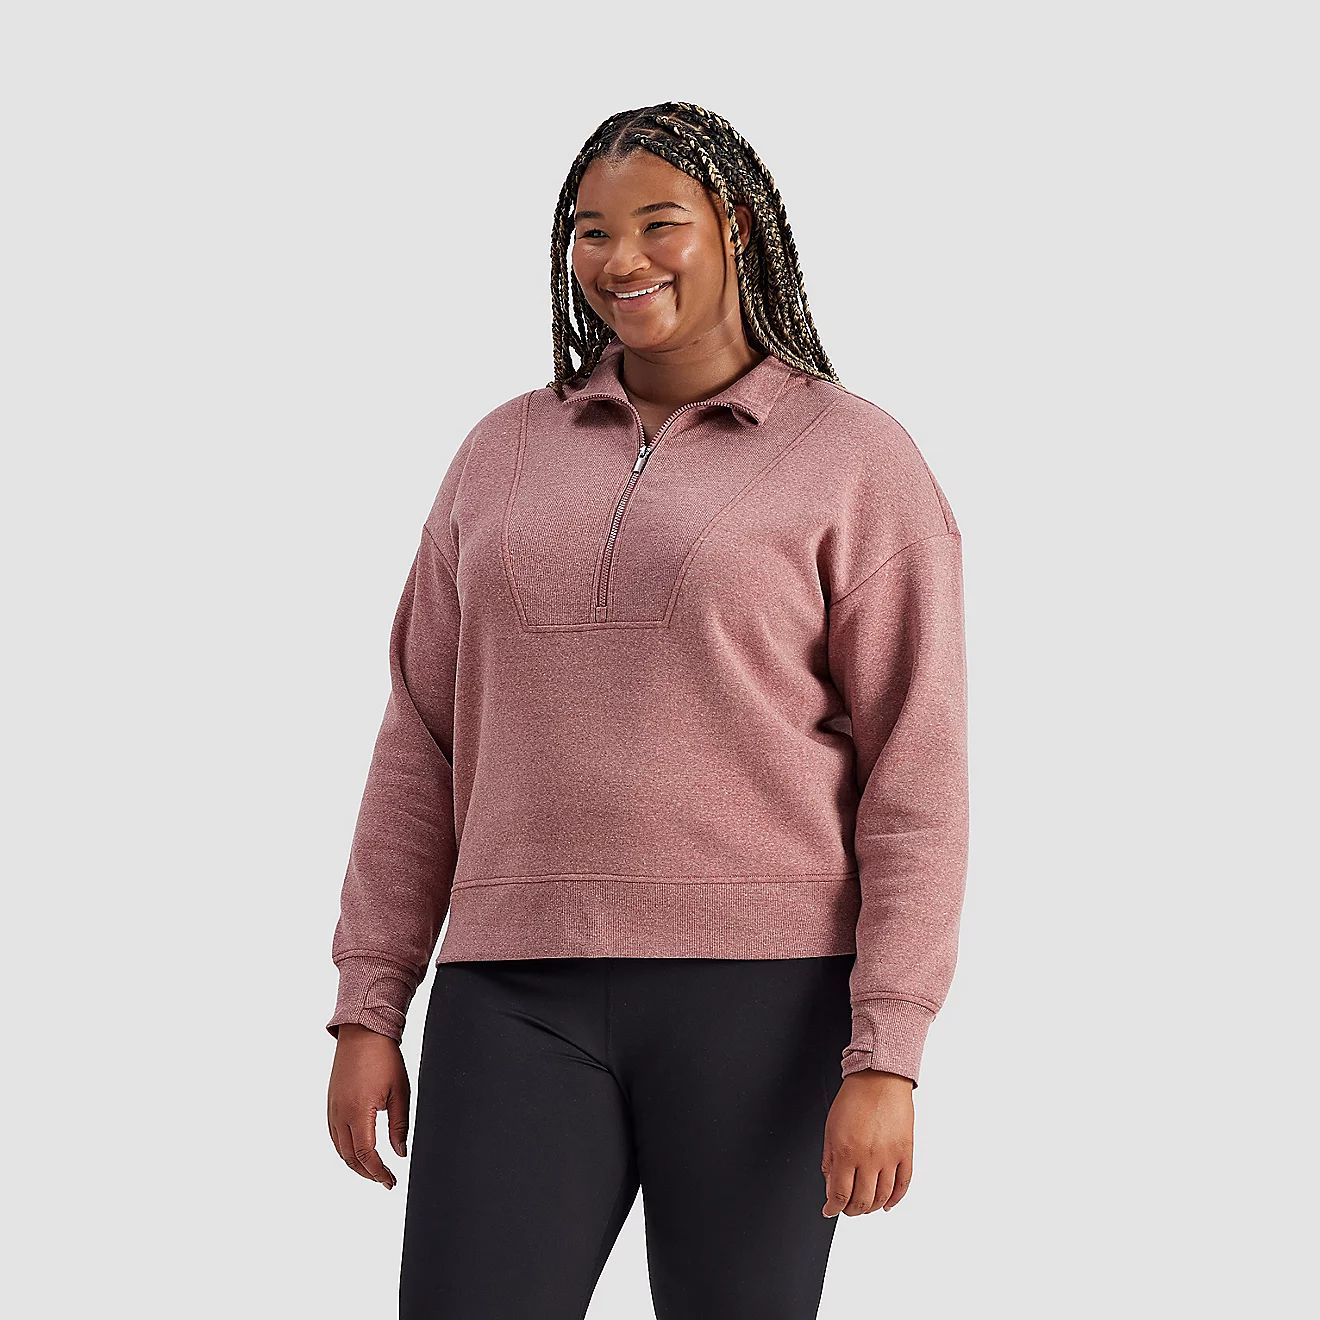 Freely Women's Plus Iris Pullover | Free Shipping at Academy | Academy Sports + Outdoors